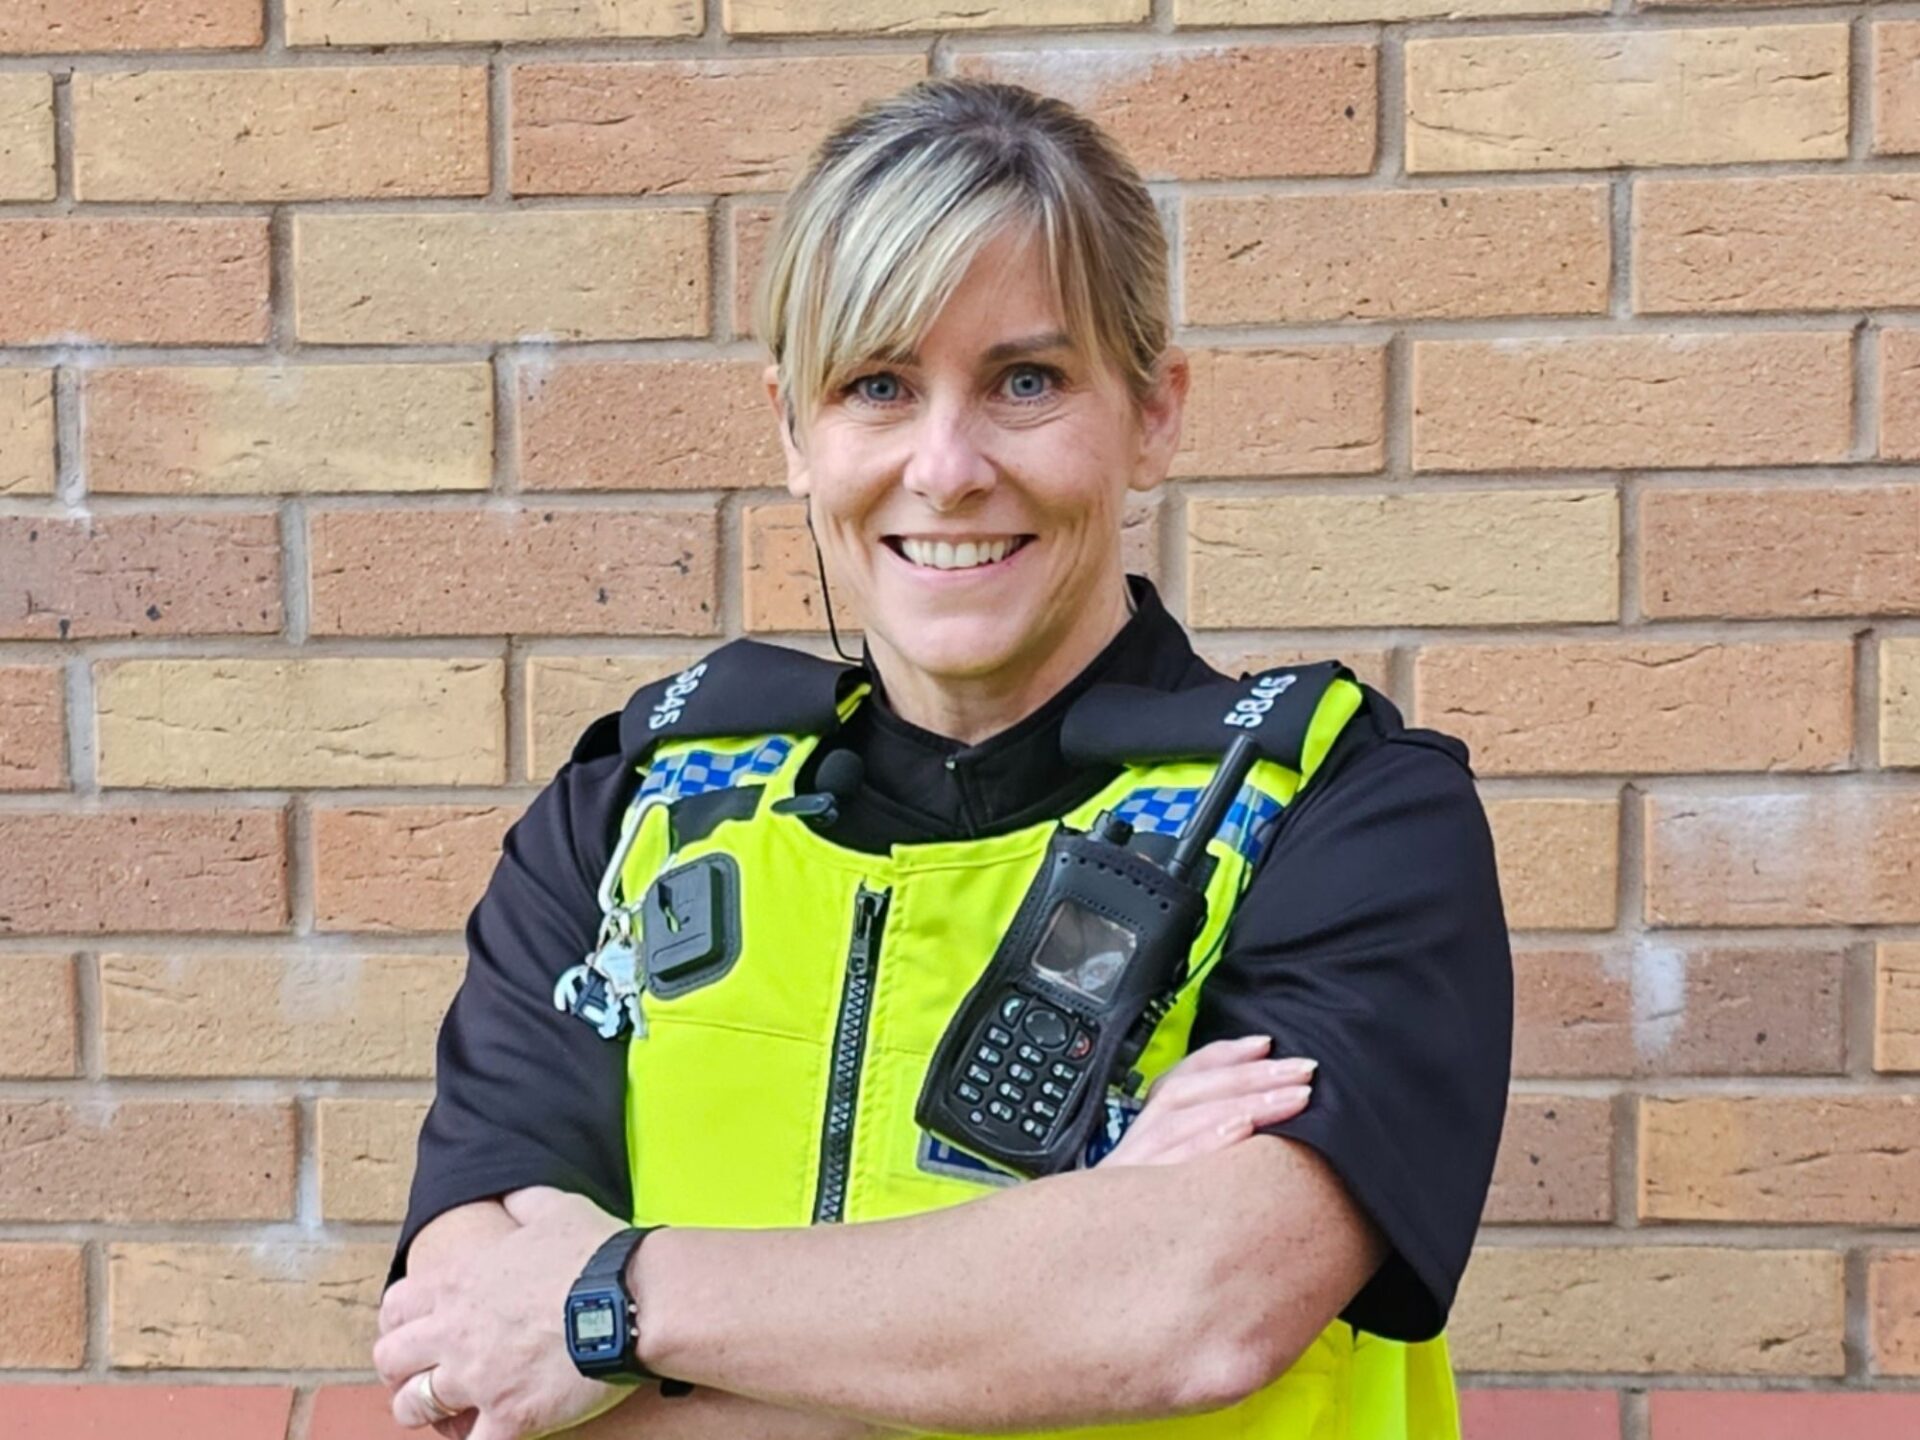 Special Constable, Kathryn Armstrong, gives us a glimpse into the world of making a real impact in her community with Northmbria Police